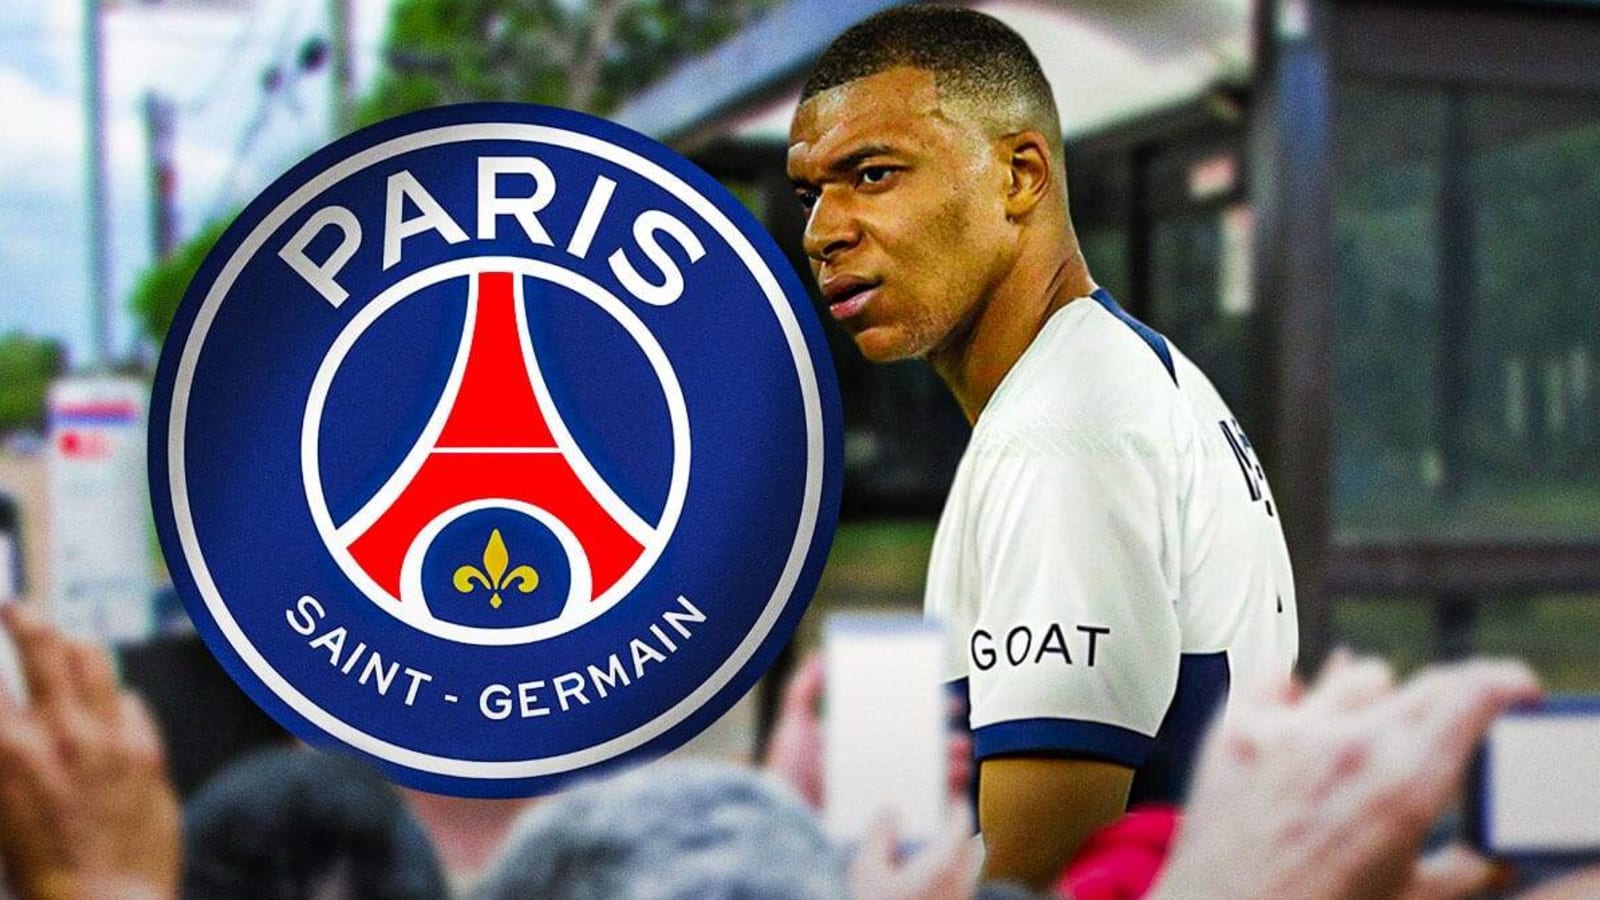 Kylian Mbappe gets left out of PSG’s team bus after Champions League defeat